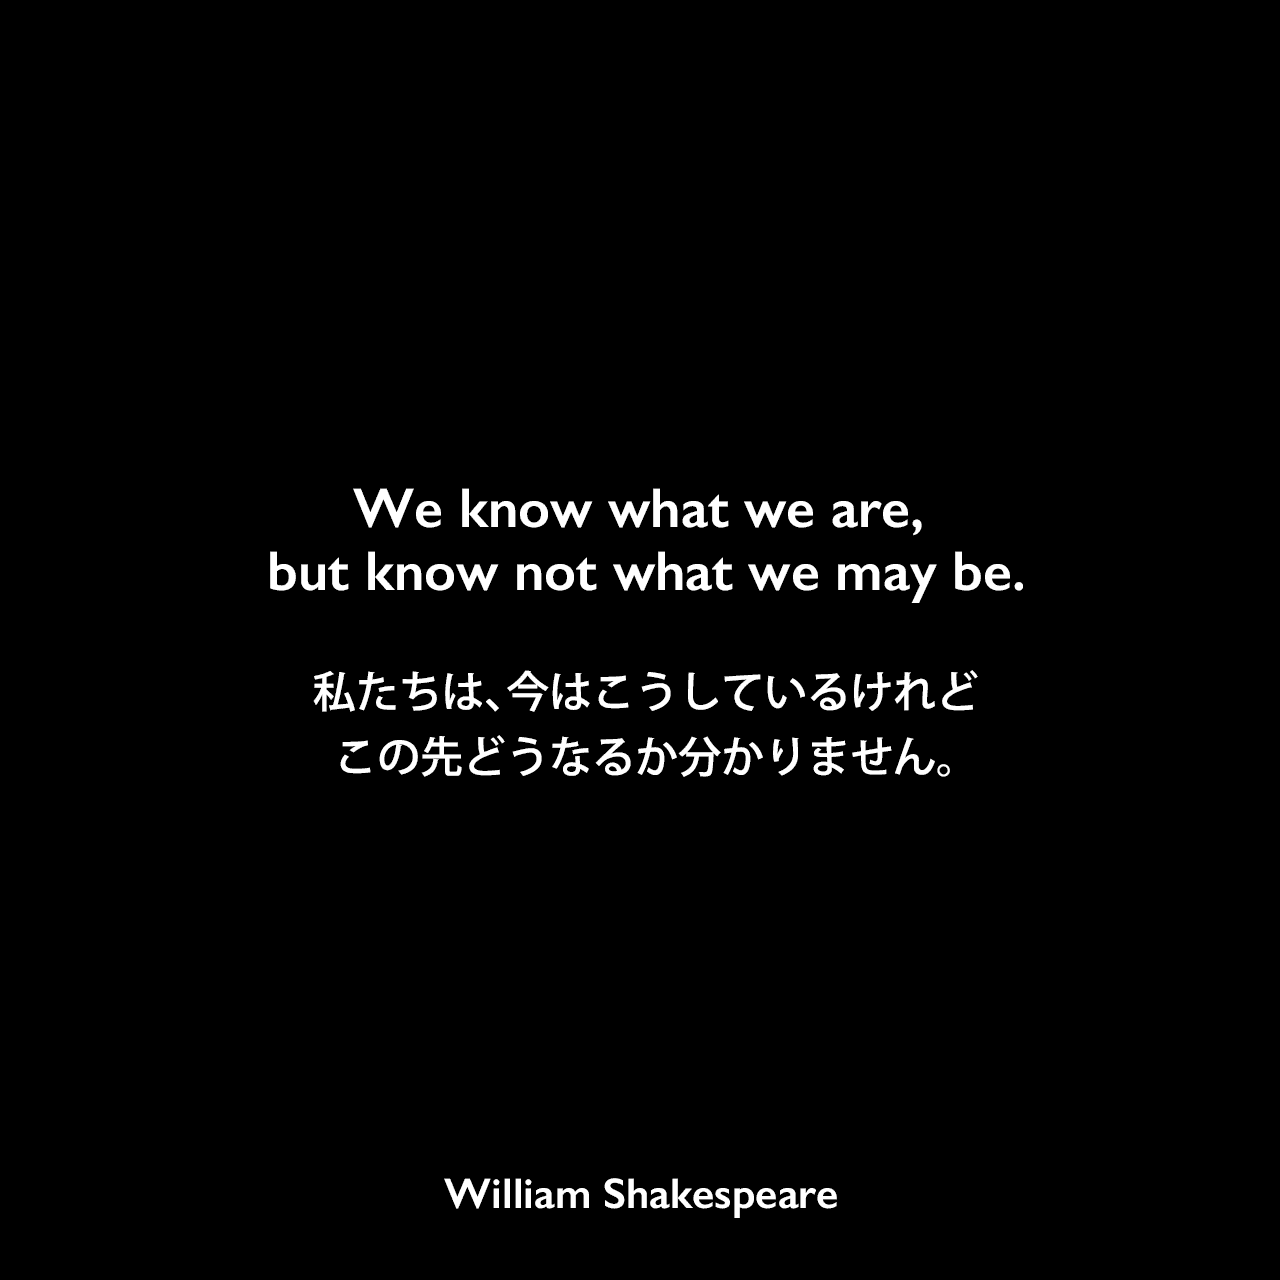 We know what we are, but know not what we may be.私たちは、今はこうしているけれど、この先どうなるか分かりません。William Shakespeare